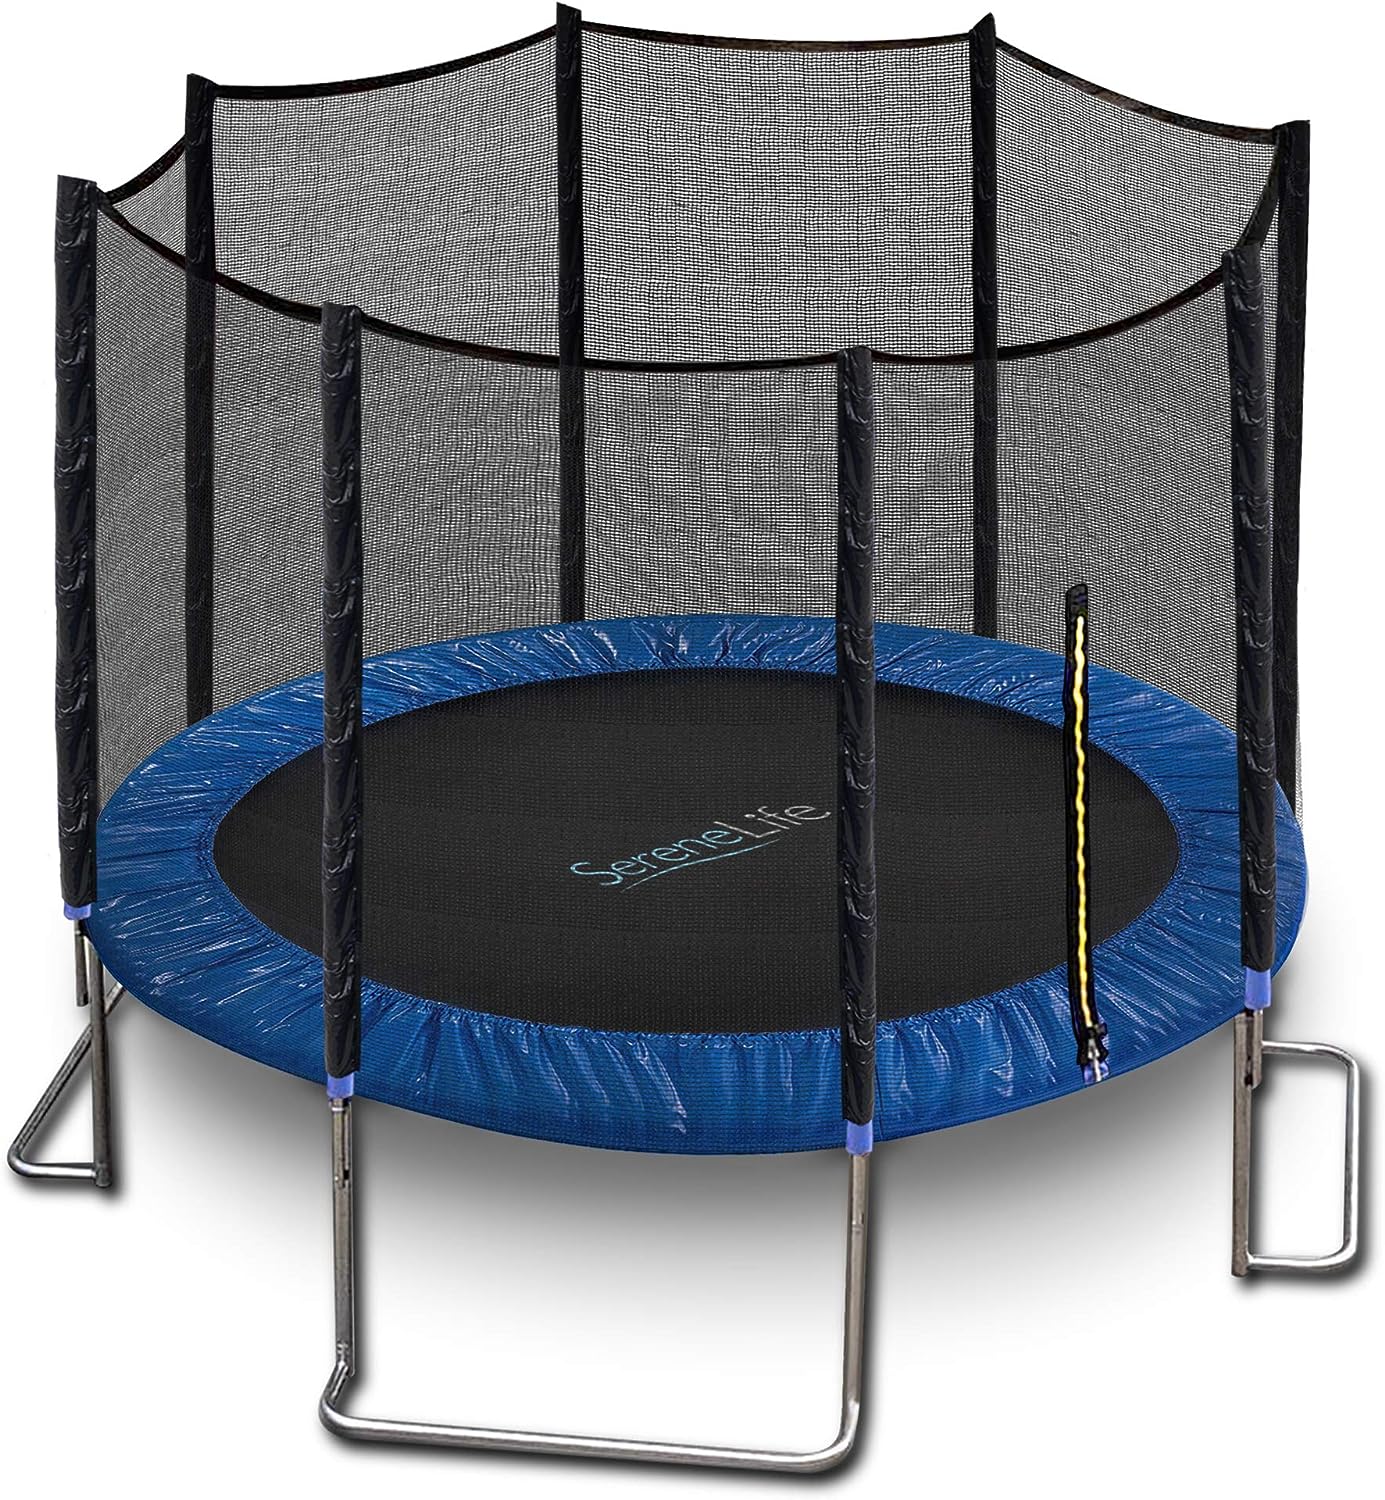 Serene Life Trampoline, Best Gifts For 8-Year-Old Boys 